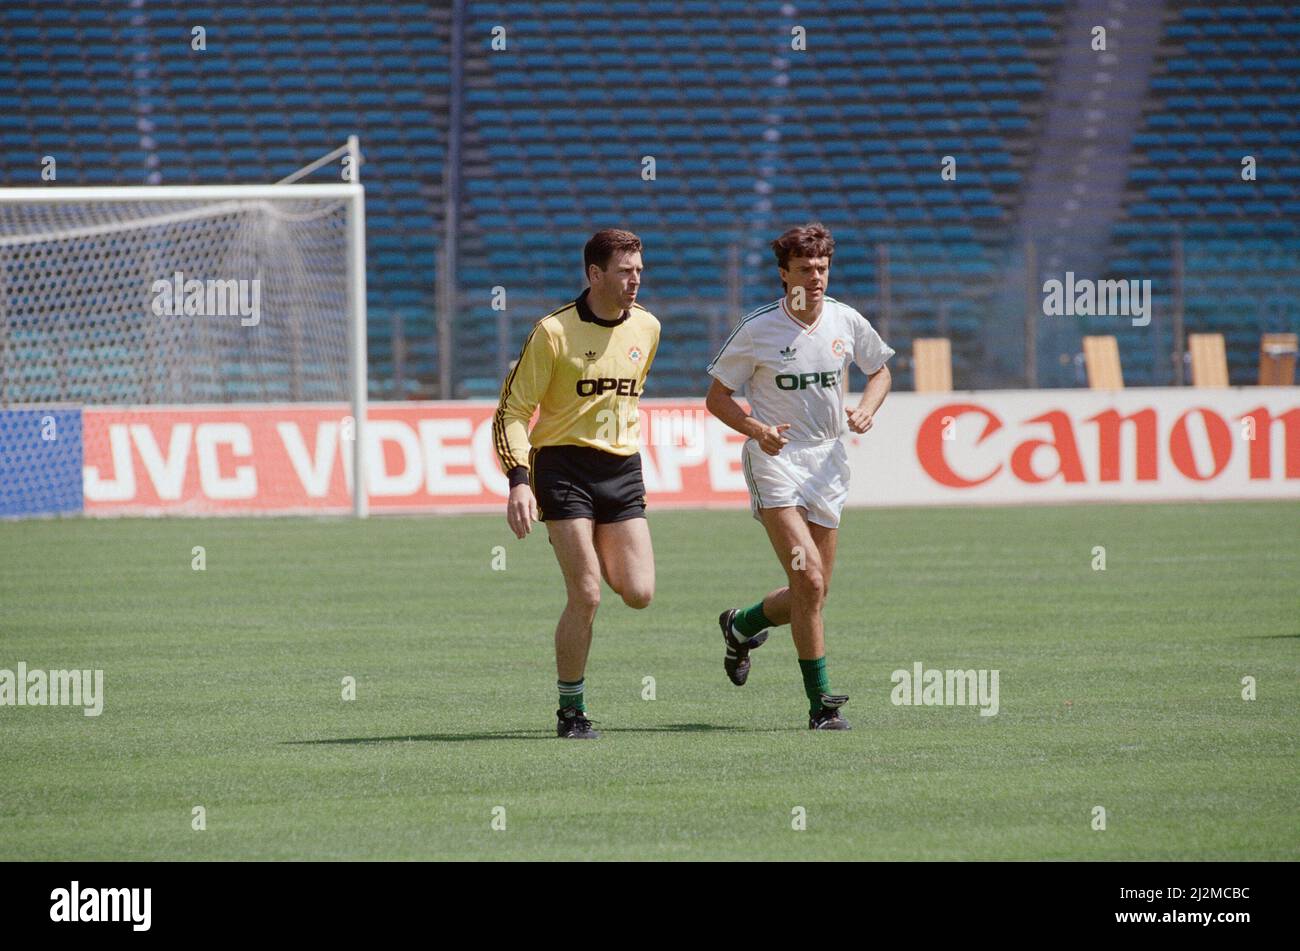 1990 World Cup Finals in Italy. Republic of Ireland goalkeeper Pat Bonner with teammate David O' Leary during a team training session. June 1990. Stock Photo